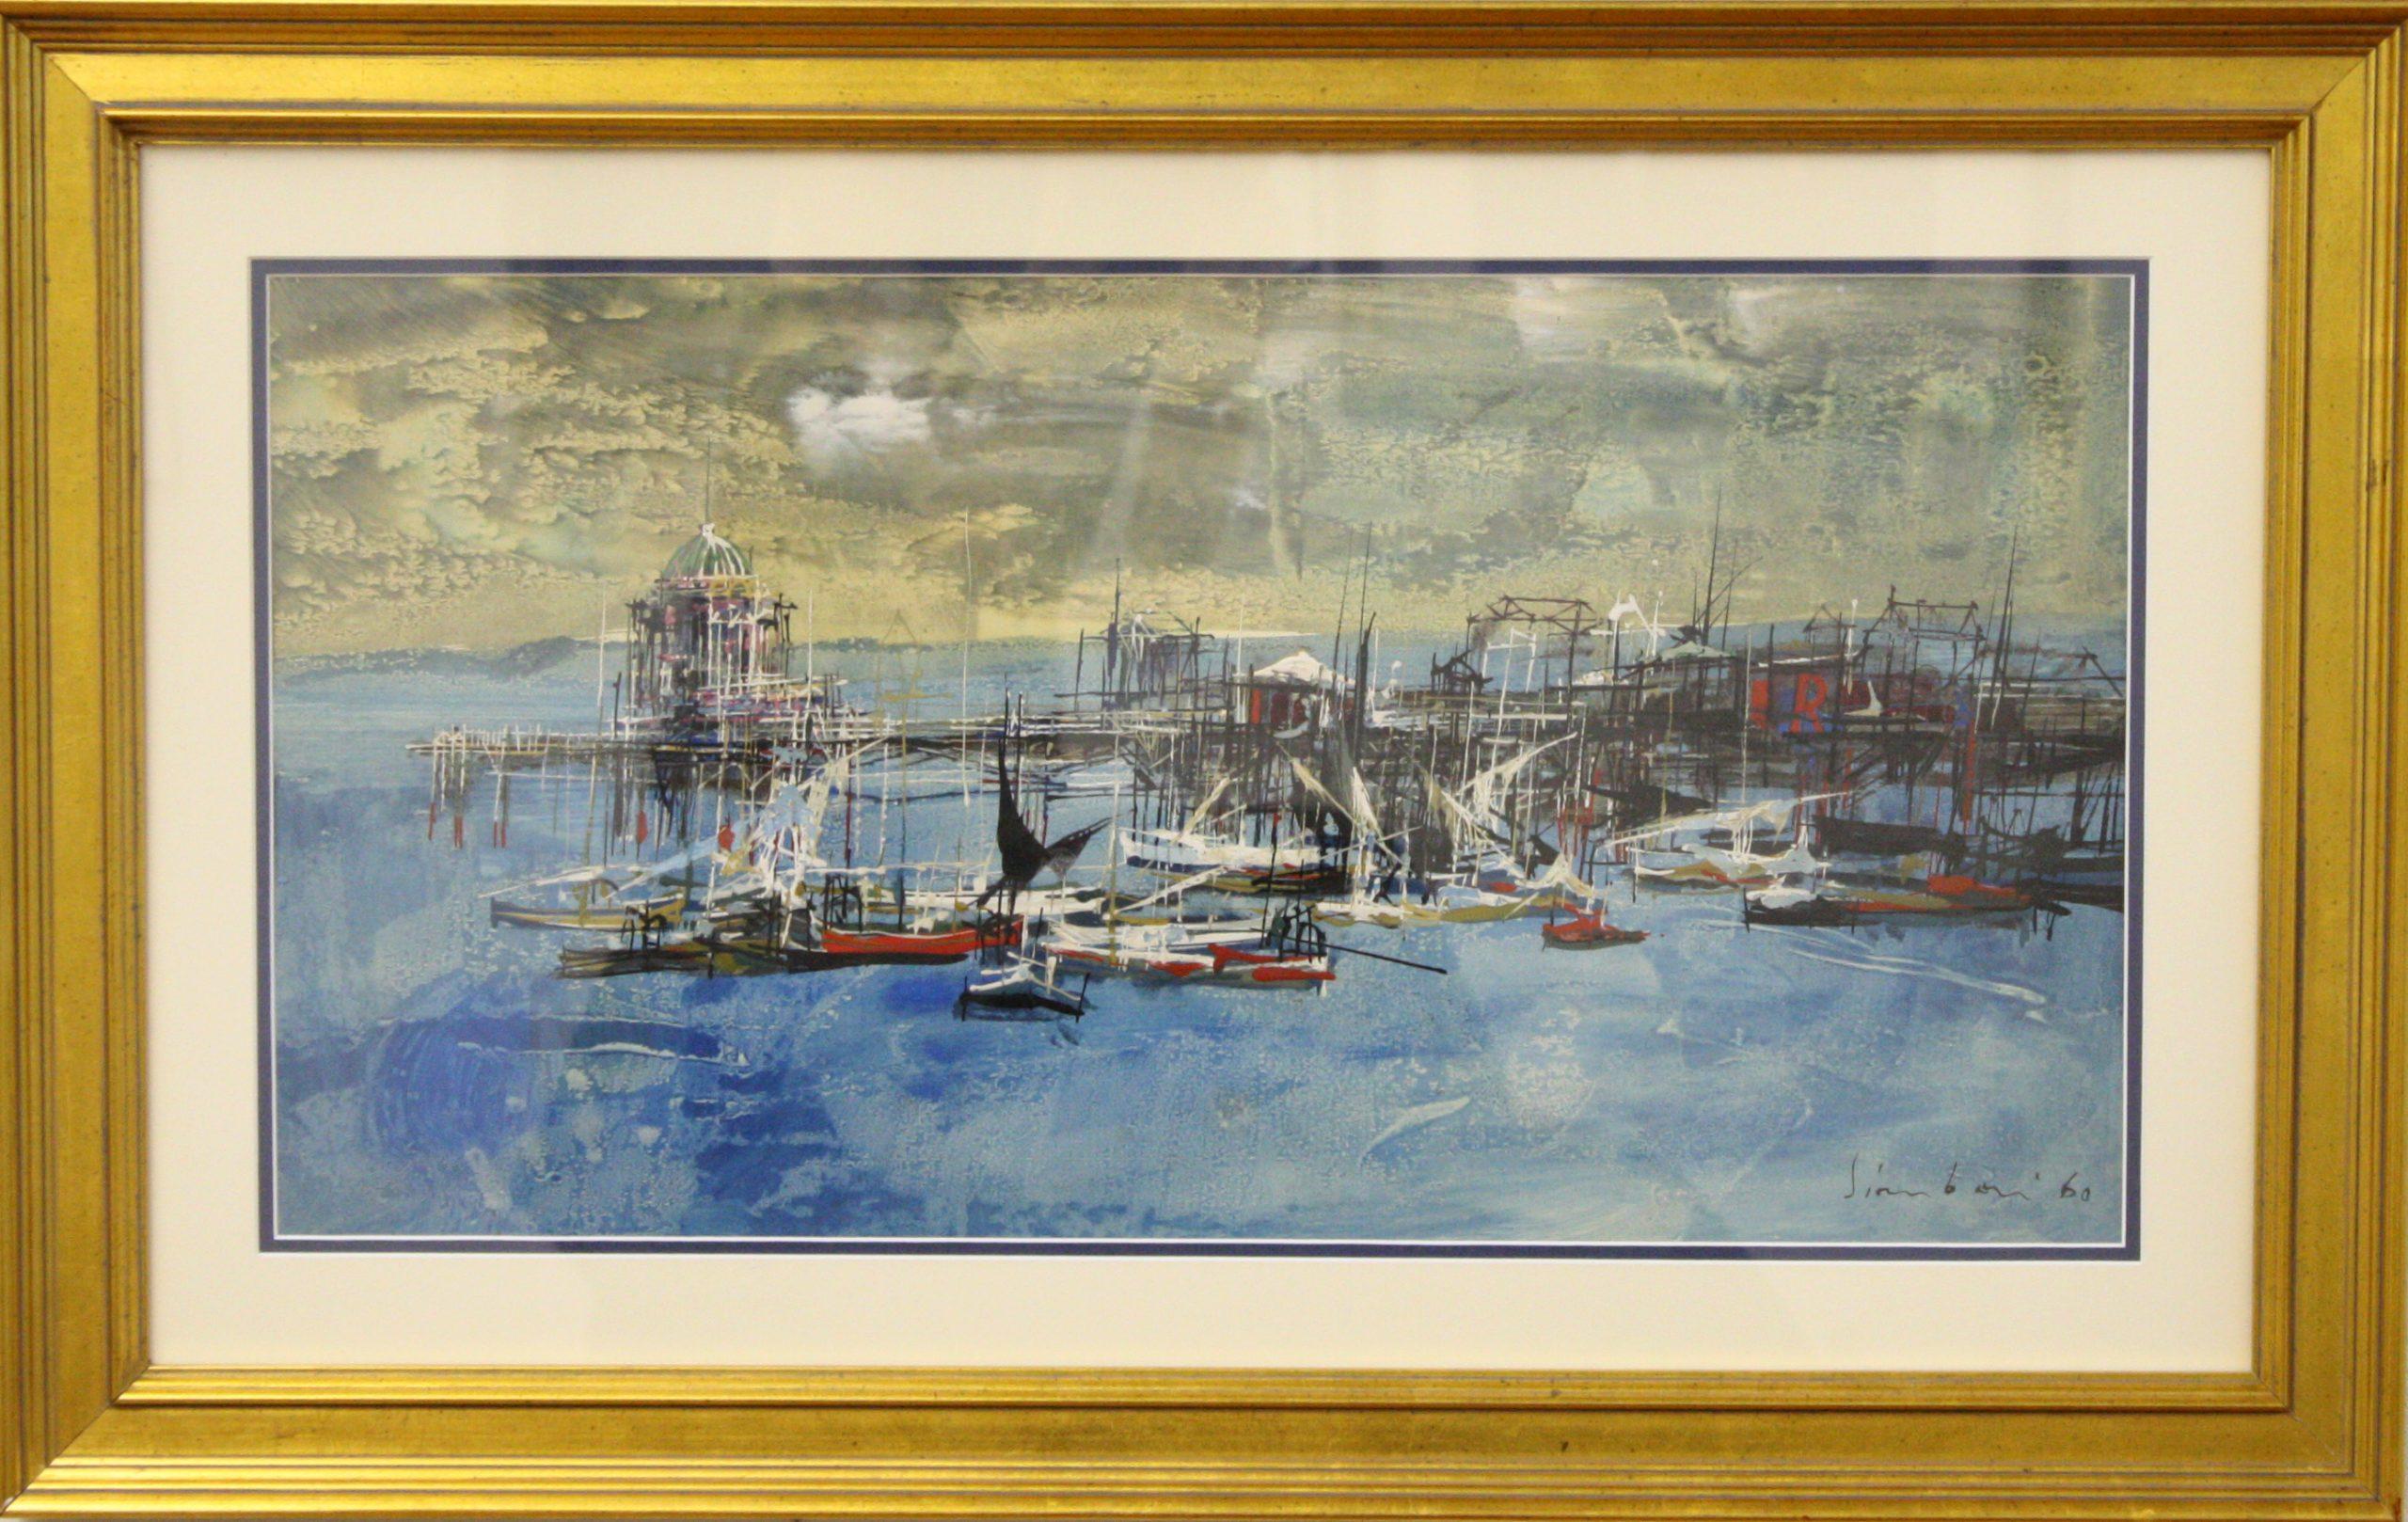 Nicola Simbari Landscape Painting - Pier and Docks-Original Gouache and Wash on Paper, Signed and Dated by Artist